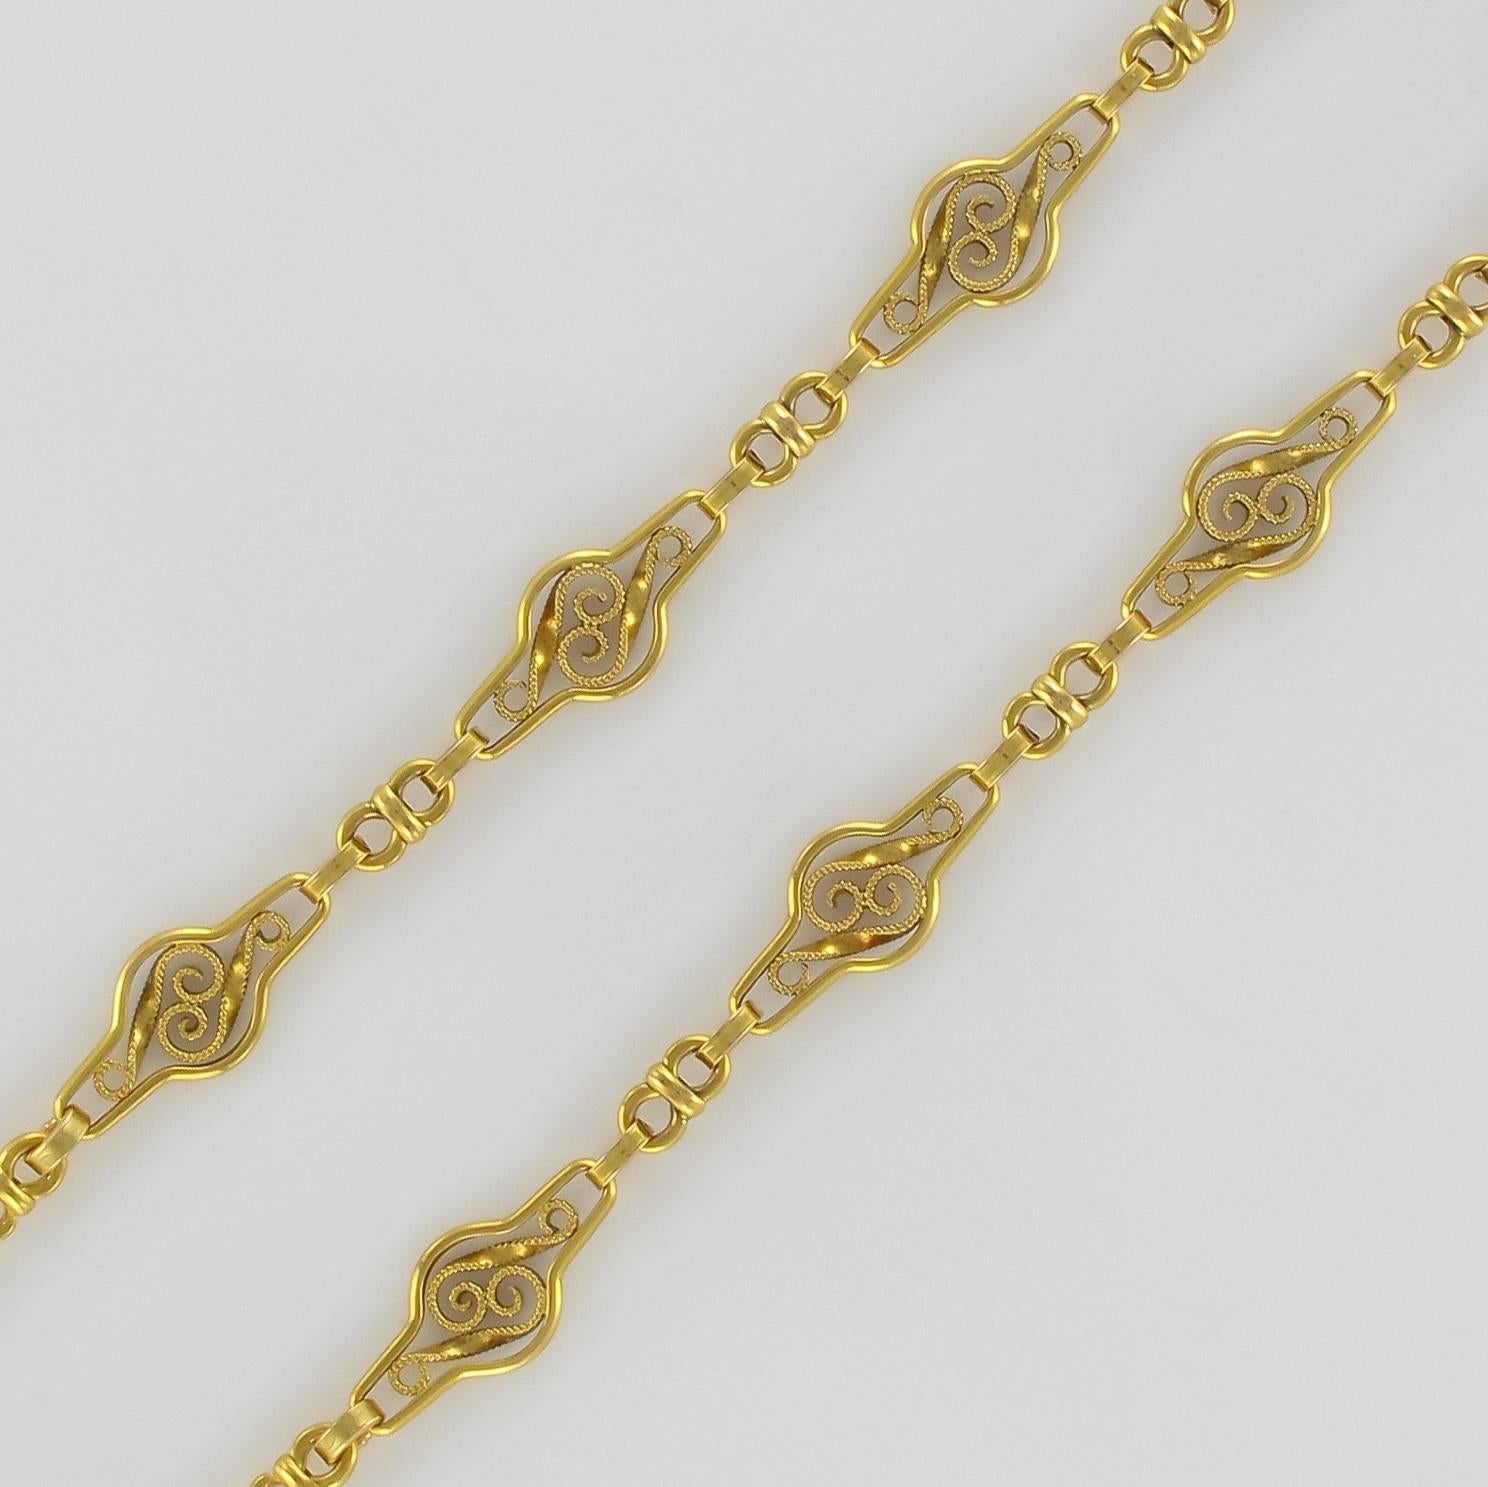 1900s Gold Necklace with Filigree Motifs 1